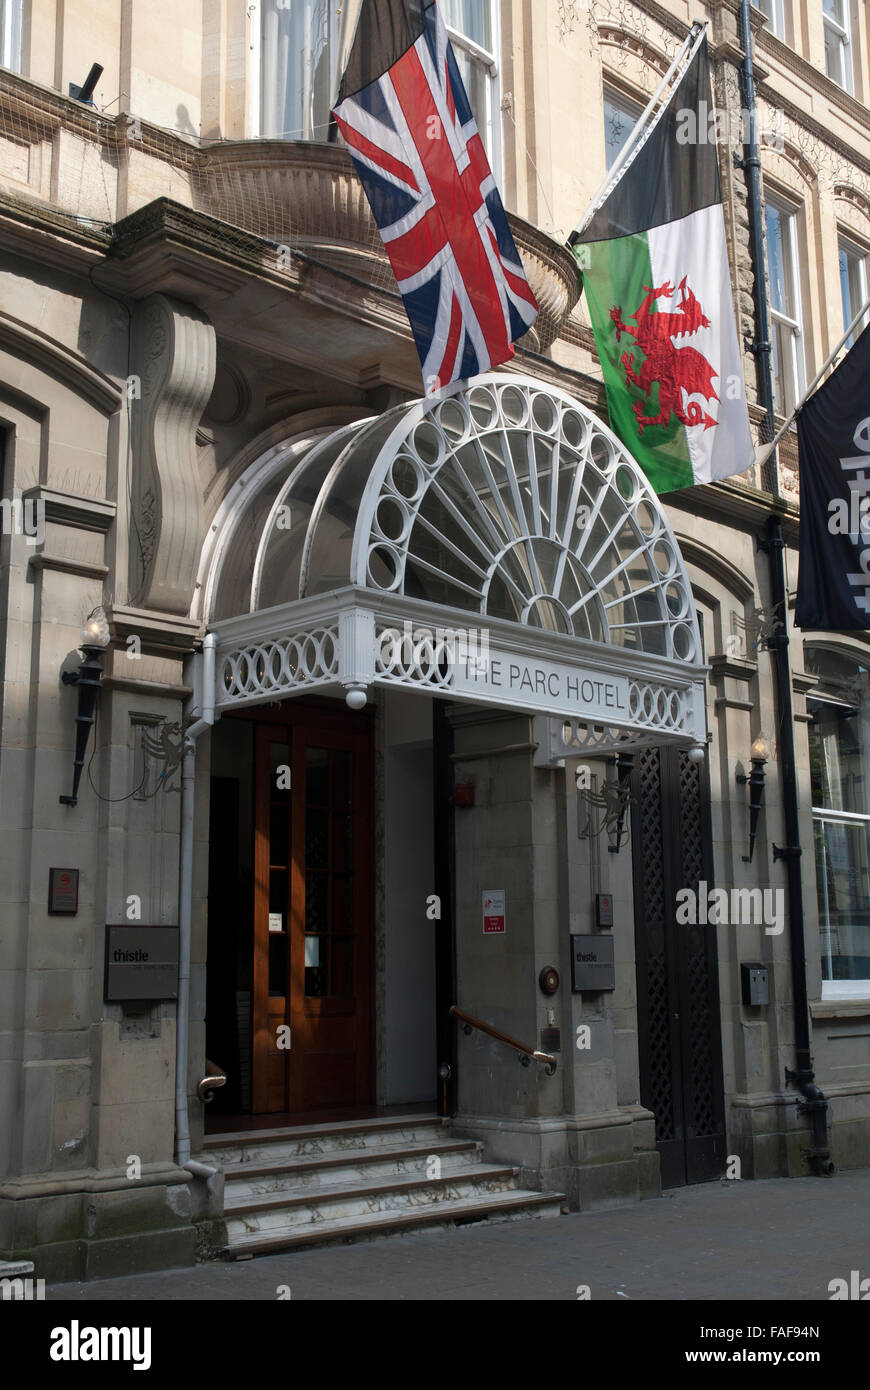 The entrance to the Thistle Hotel, Cardiff City Centre, Cardiff Wales UK Stock Photo